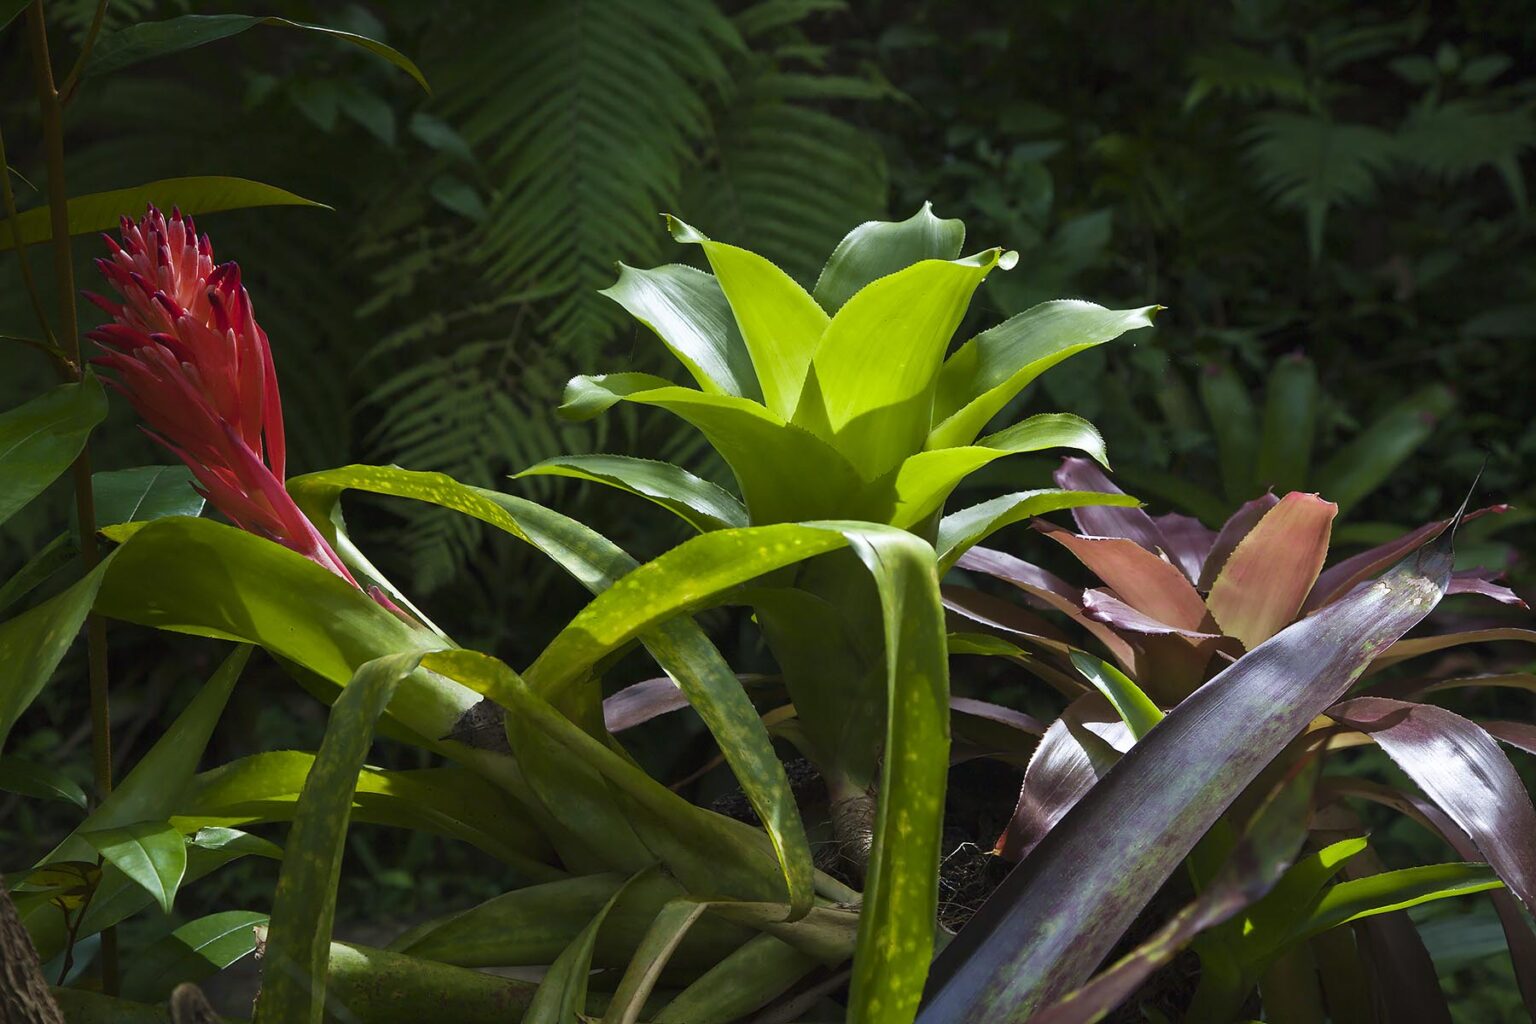 A BROMELIAD PLANTS in bloom at the BOTANICAL GARDEN UBUD - BALI, INDONESIA